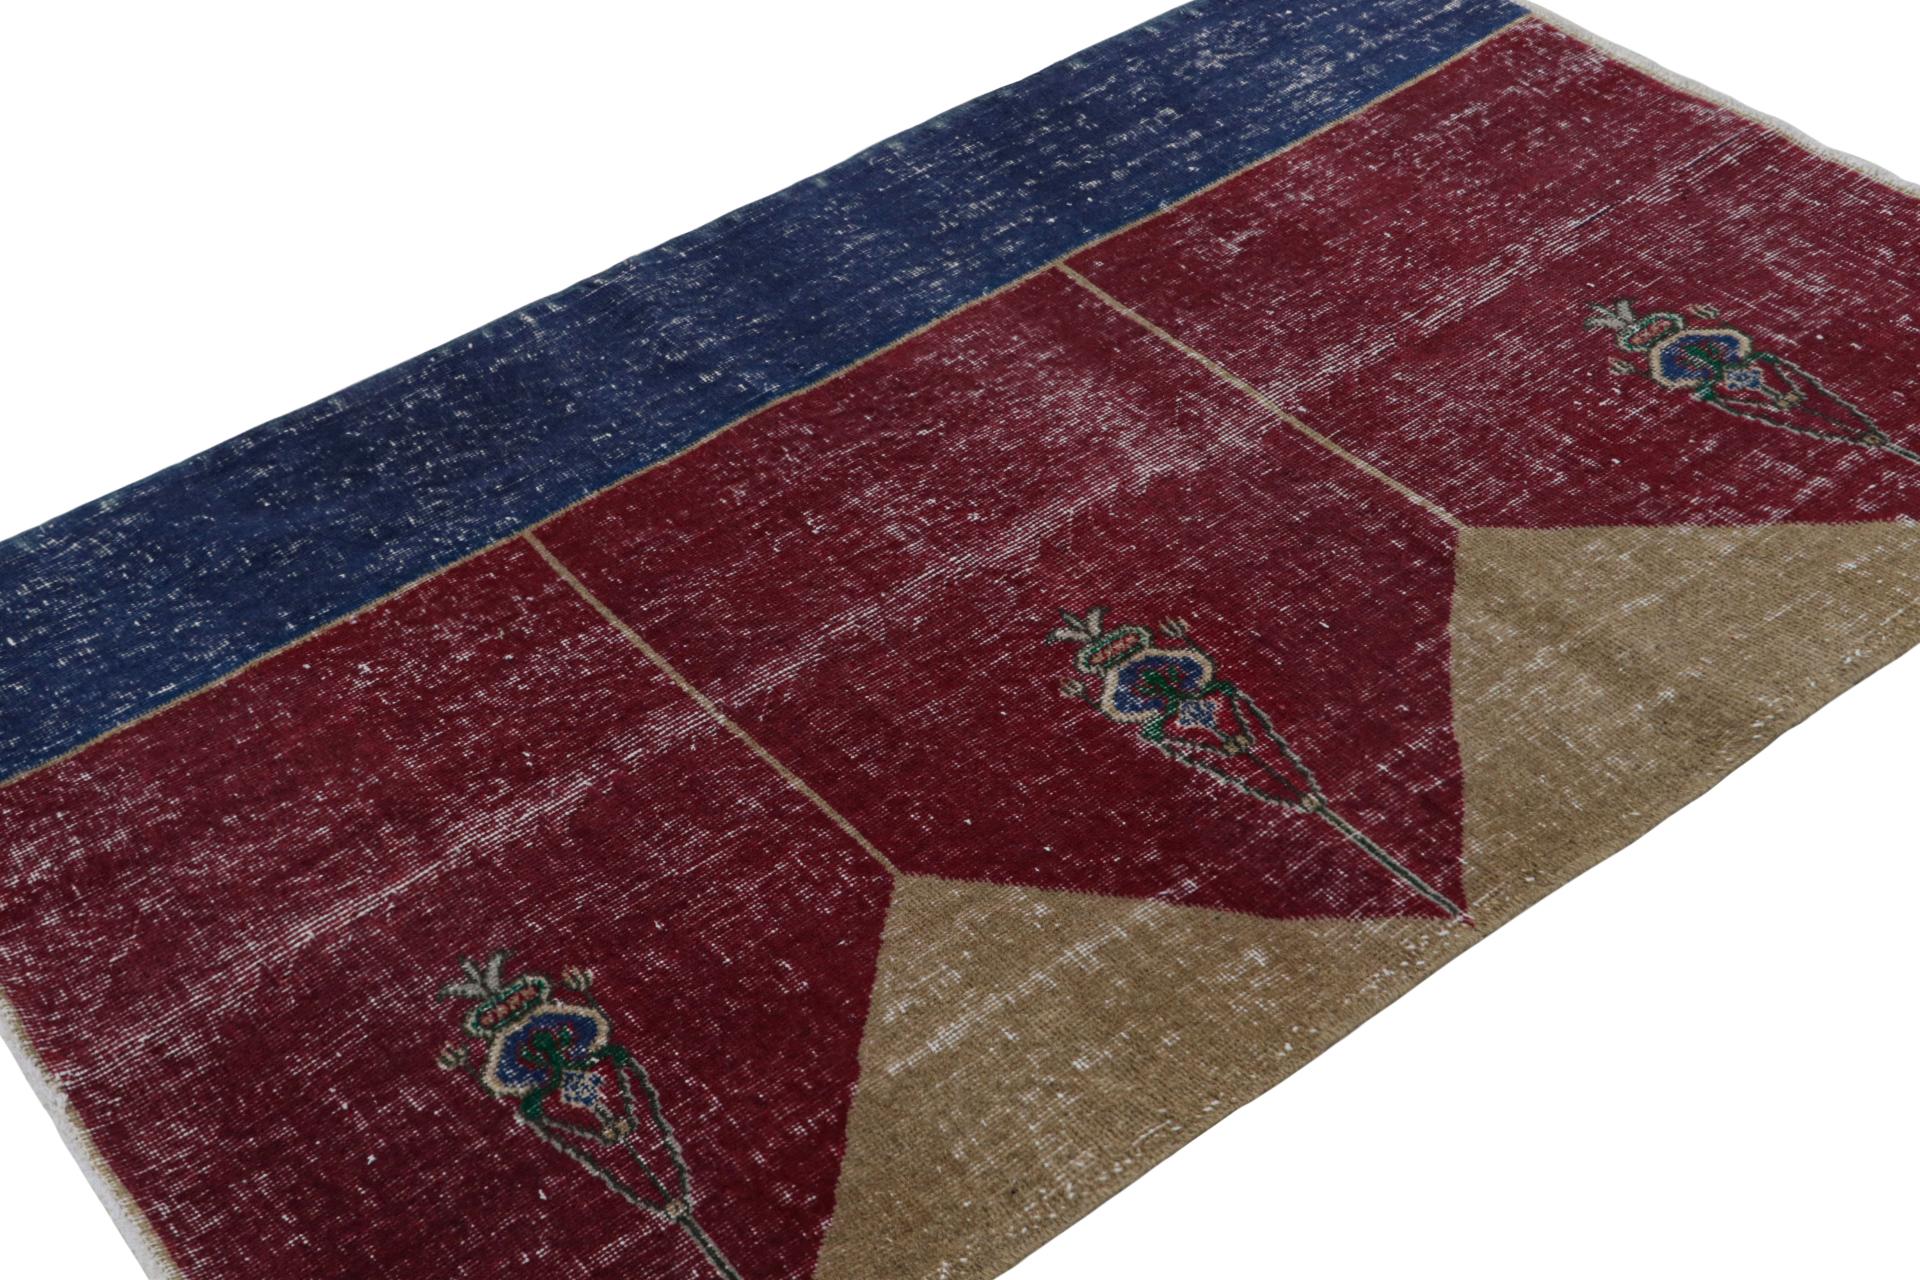 Hand-knotted in wool, this distressed vintage 4x6 Turkish rug, which is inspired by Saf rugs, a particular kind of prayer rug, features a red field and geometric patterns in hues of bronze and navy blue.  

On the Design: 

Connoisseurs will admire